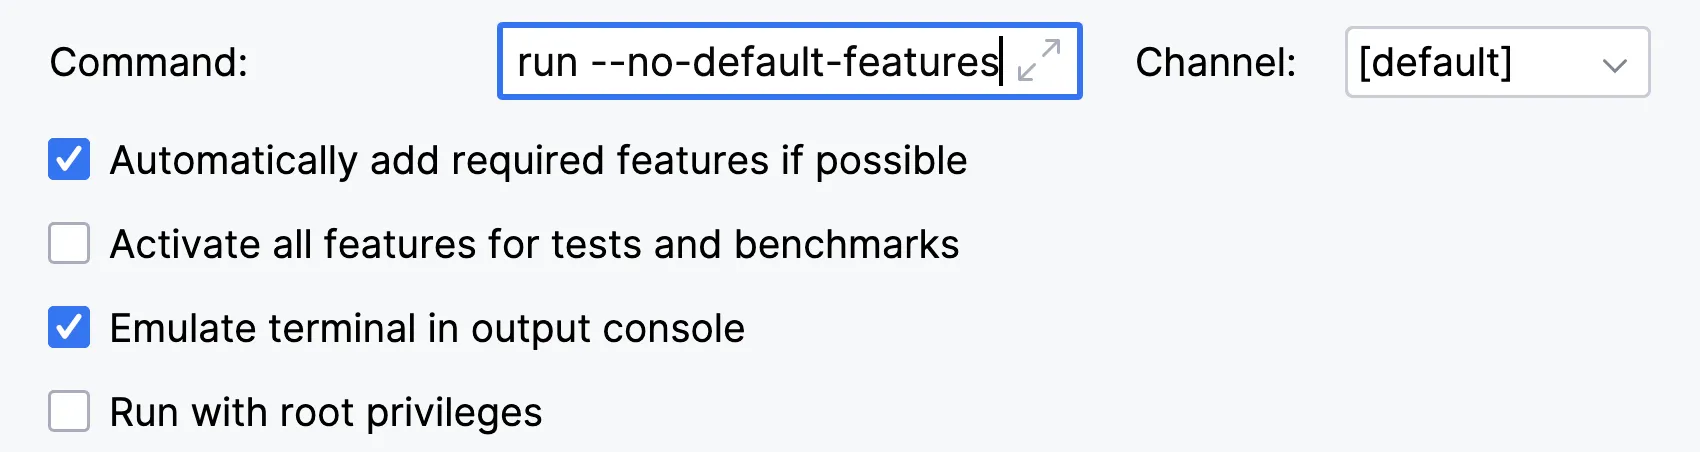 Add --no-default-features flag